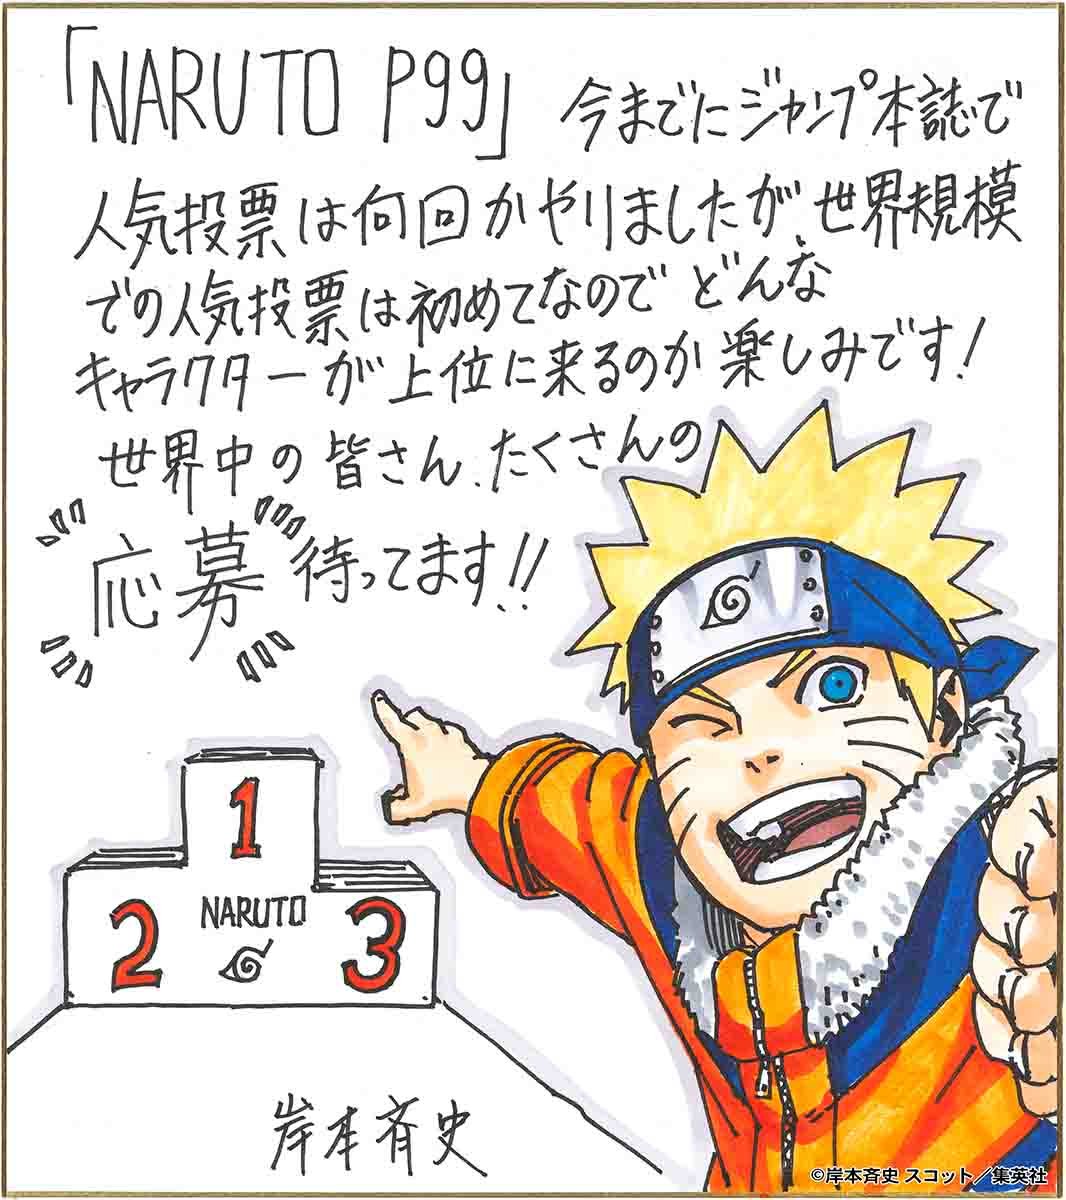 NARUTO TOP 99 a worldwide characters popularity poll featuring all Naruto  characters announced for 20th Anniversary Celebration. The Number 1  character will receive a Special Short manga drawn by Kishimoto-Sensei. : r/ Naruto